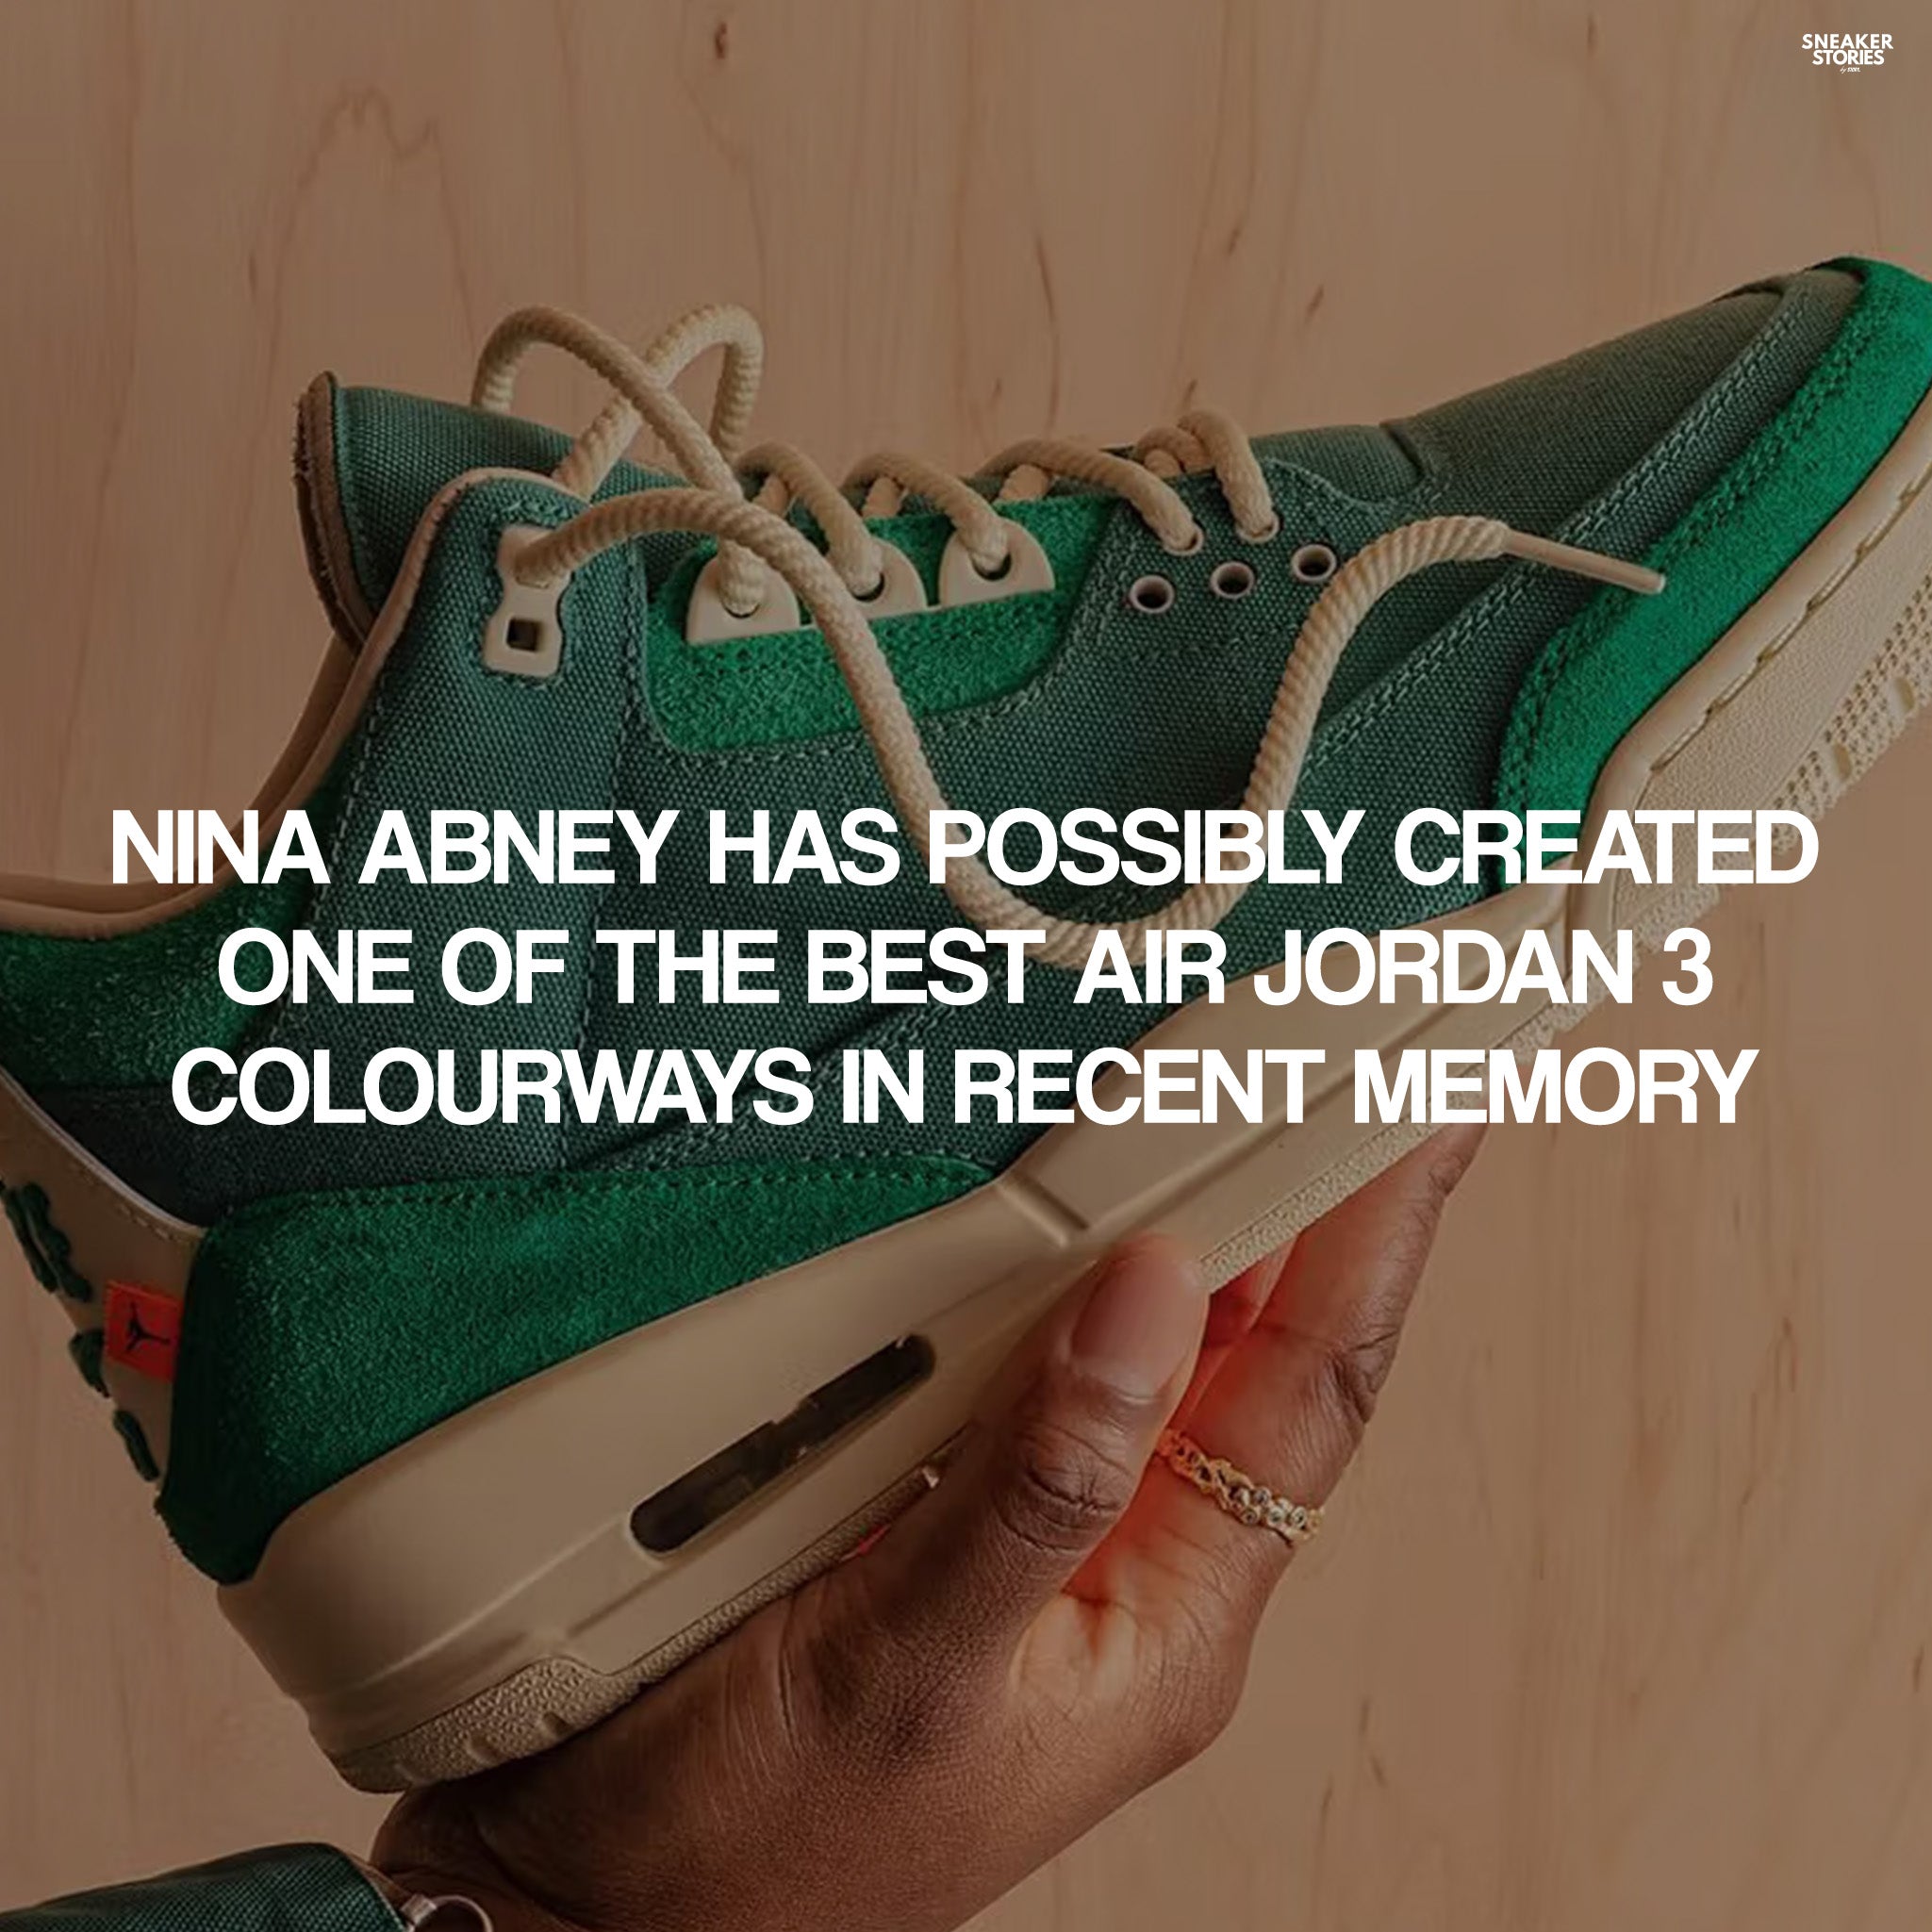 Nina Abney has possibly created one of the best Air Jordan 3 colourways in recent memory